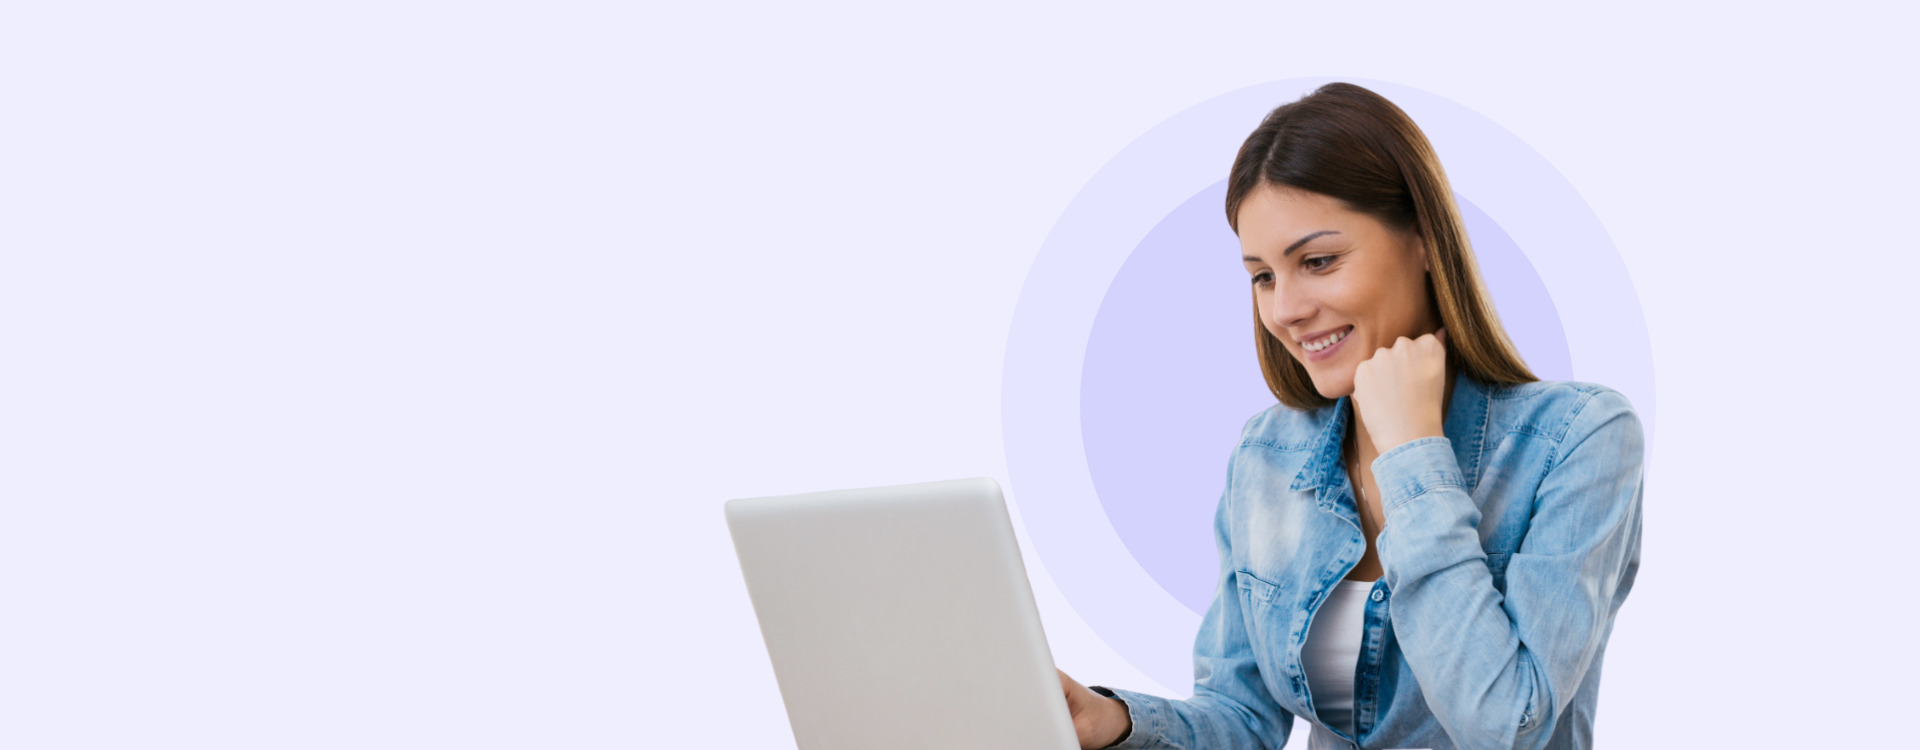 Homepage banner image of a woman smiling, sitting down while looking a laptop